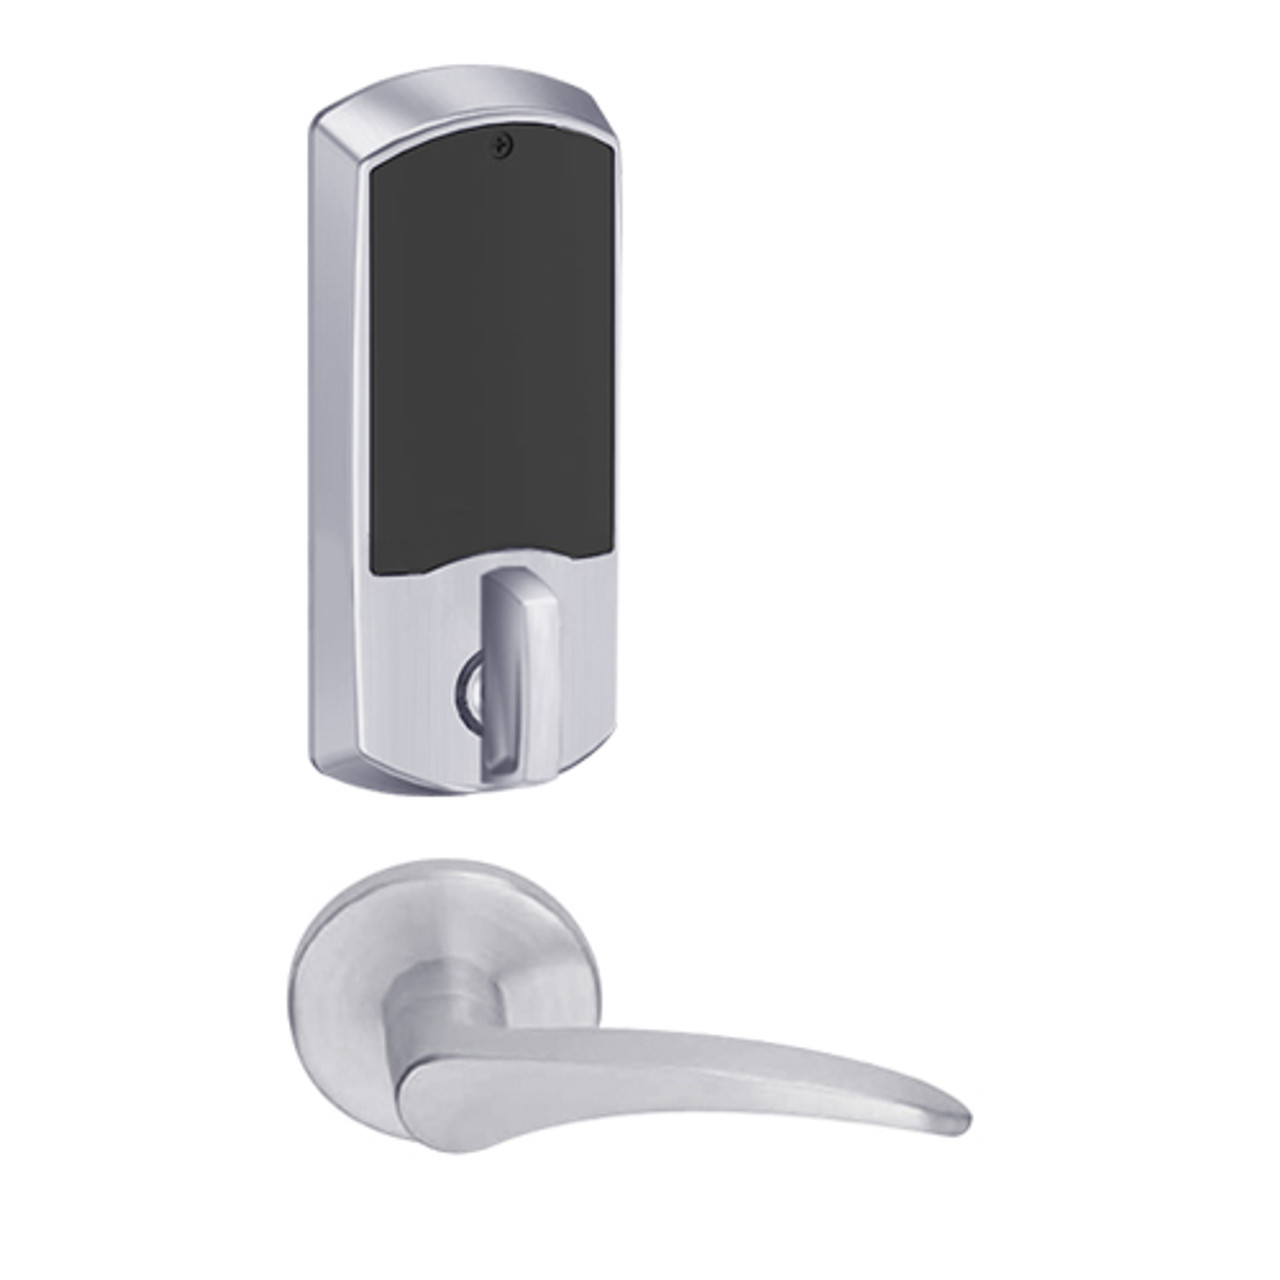 LEMD-GRW-BD-12-626-00A-RH Schlage Privacy/Apartment Wireless Greenwich Mortise Deadbolt Lock with LED and 12 Lever Prepped for SFIC in Satin Chrome